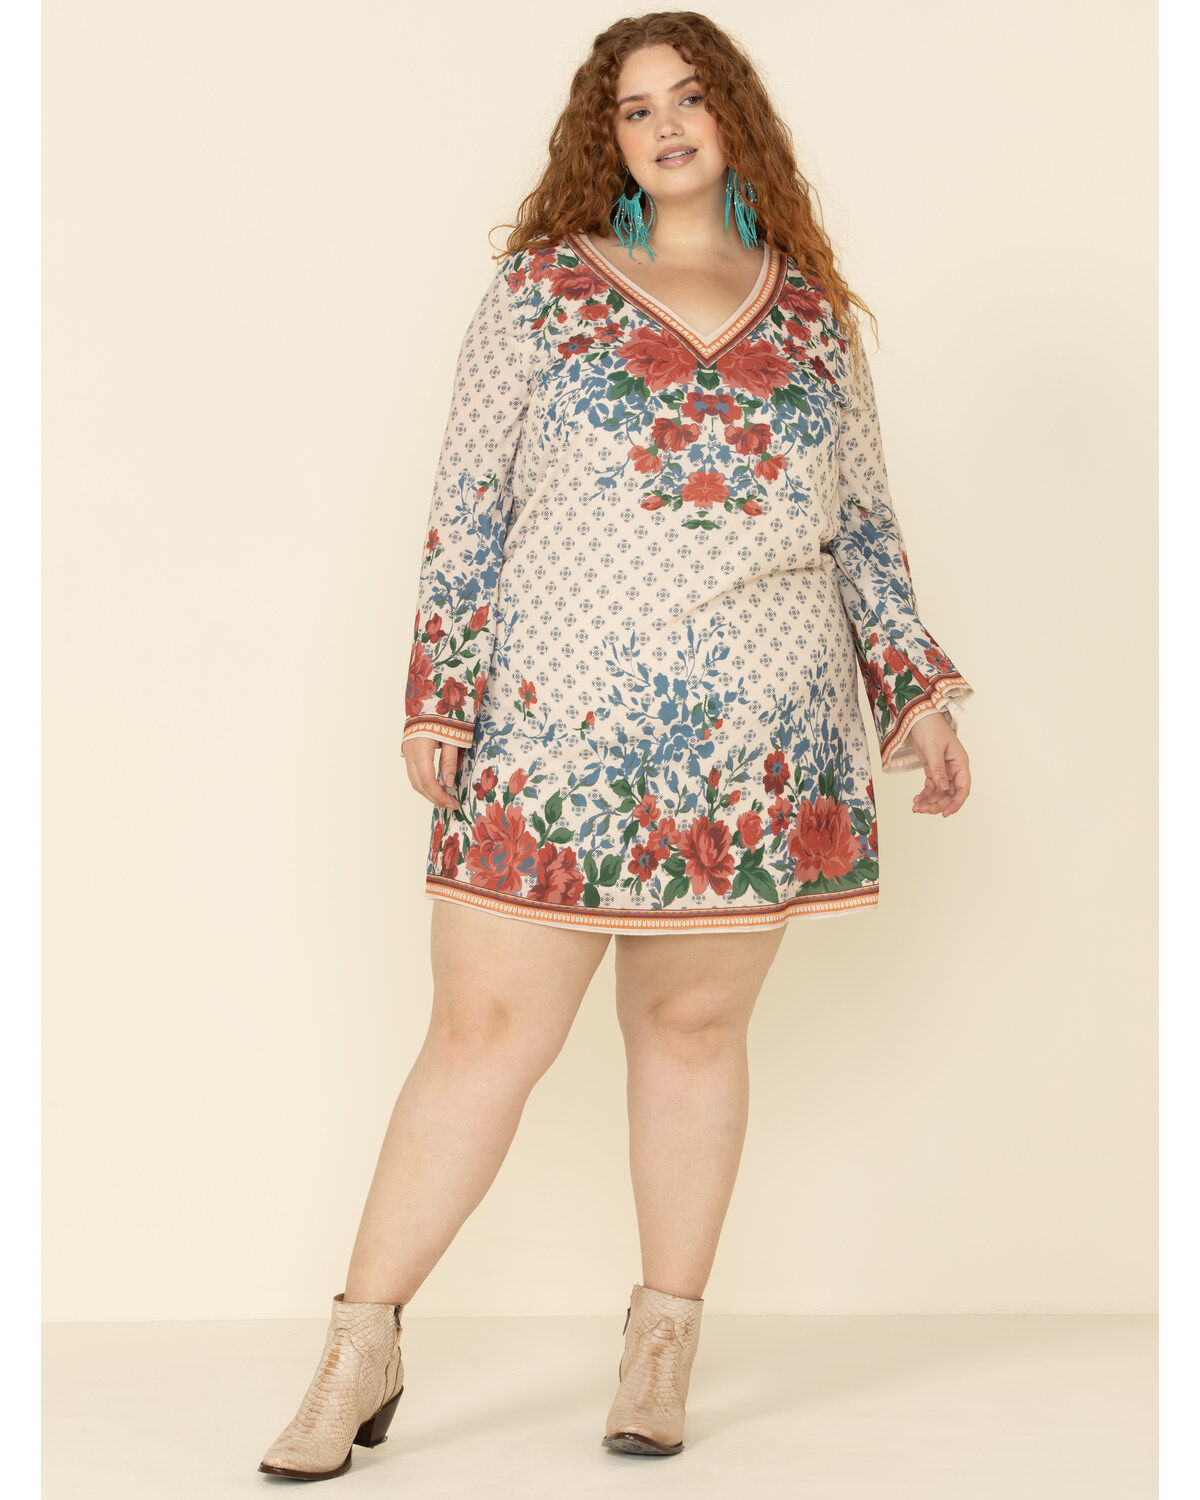 plus size dress and boots